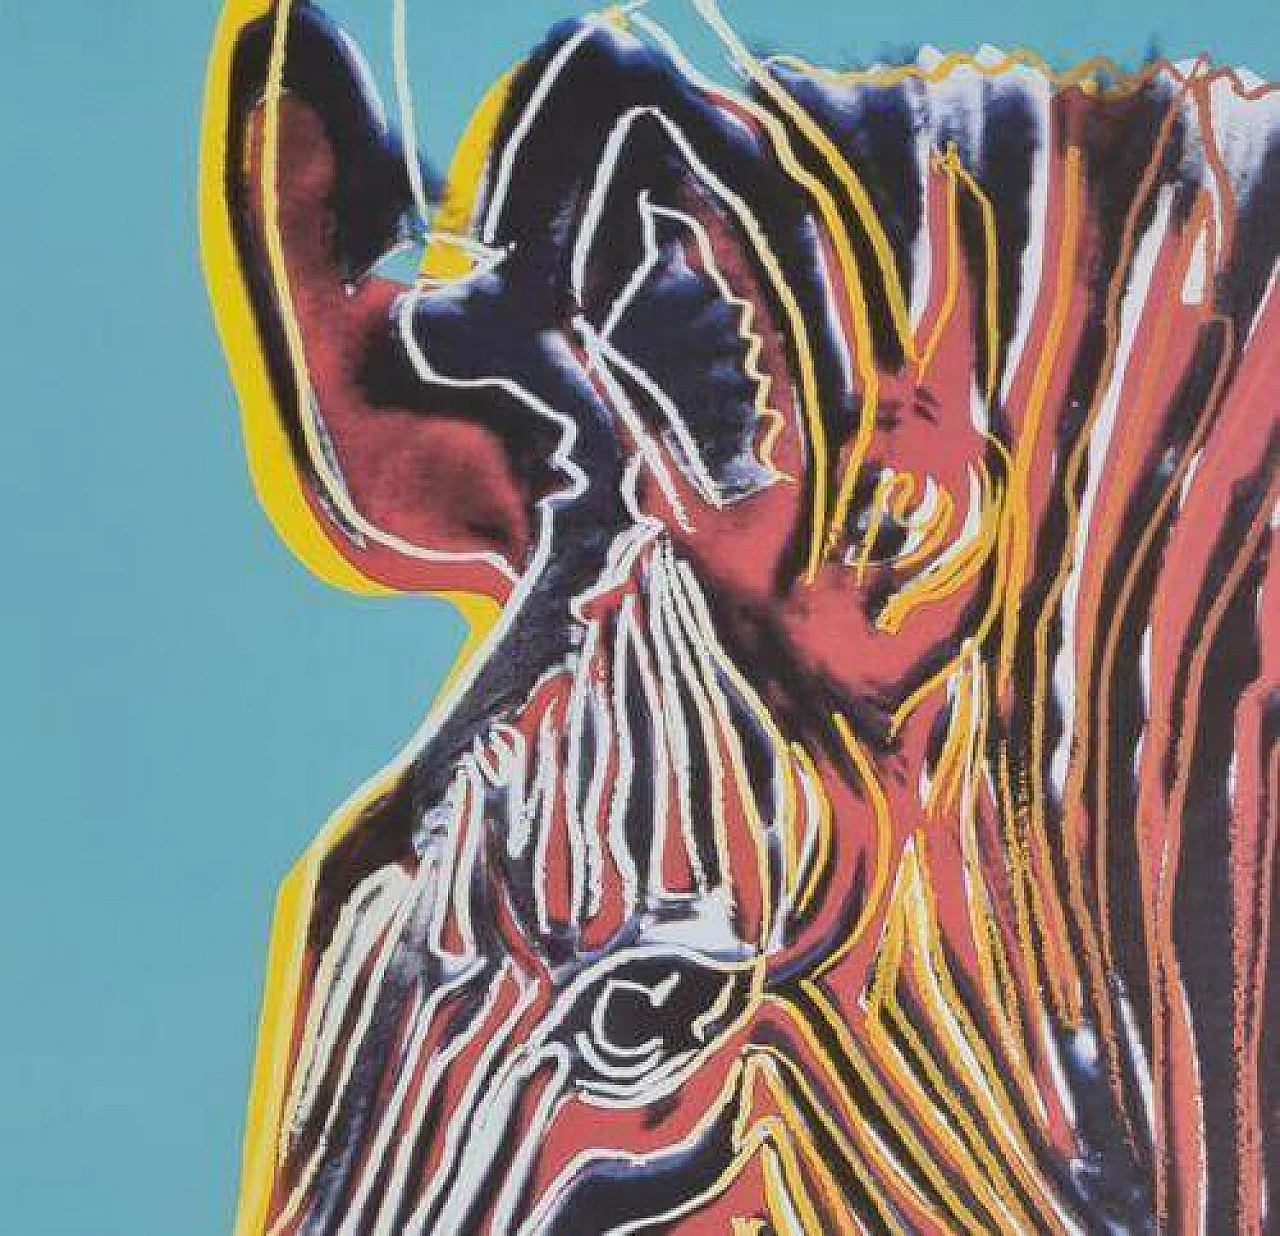 Zebra, lithography, reproduction after Andy Warhol 1